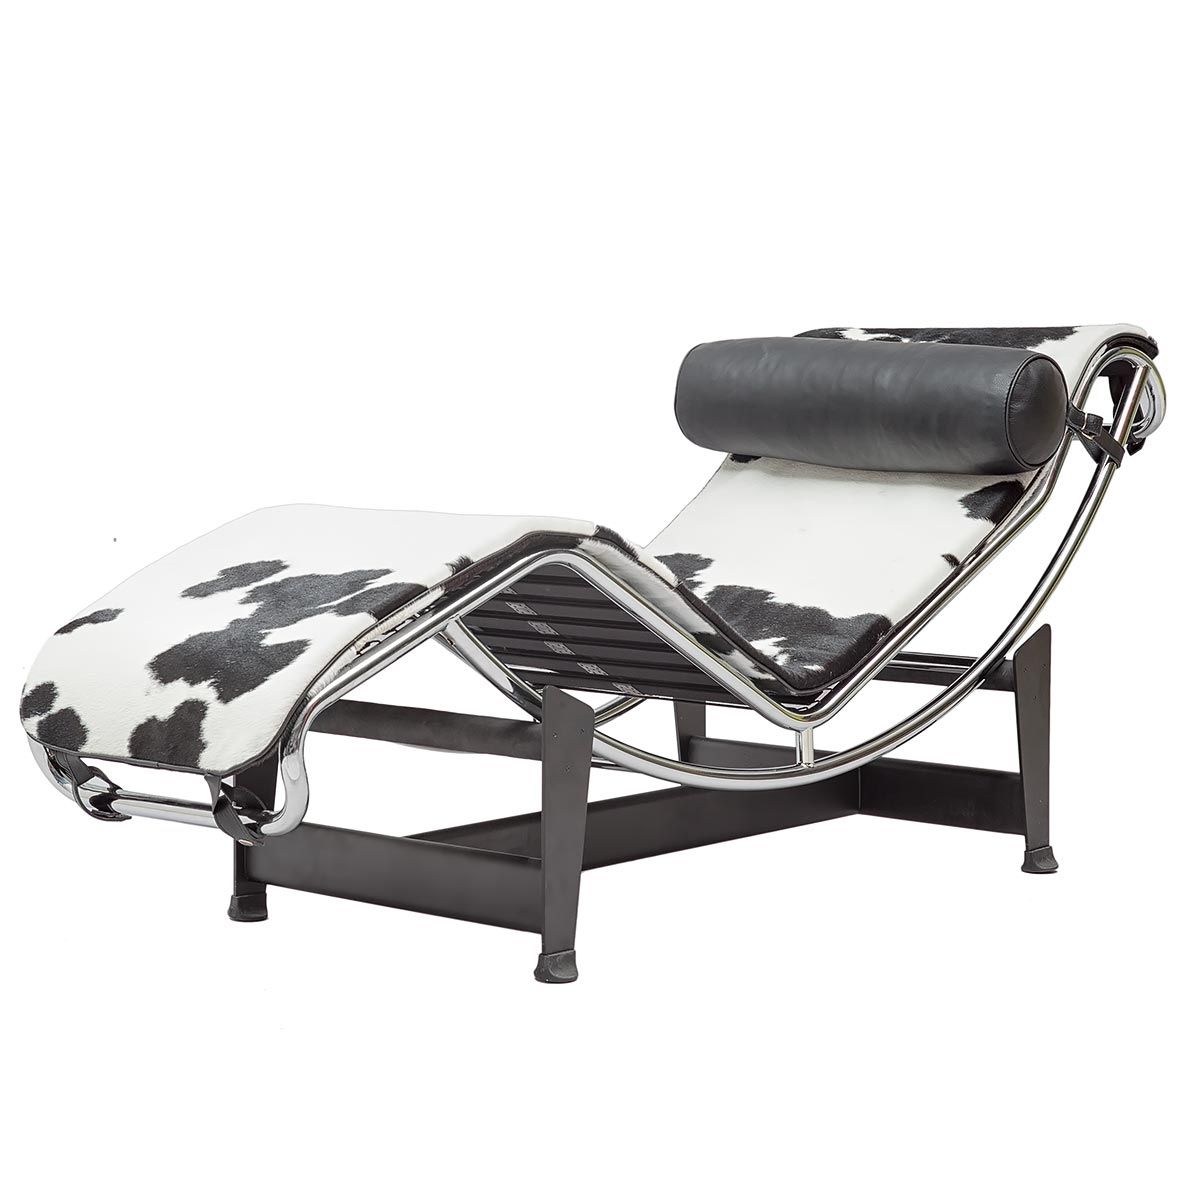 A Steelform Design Classic In Le Corbusier Chaises (View 8 of 15)